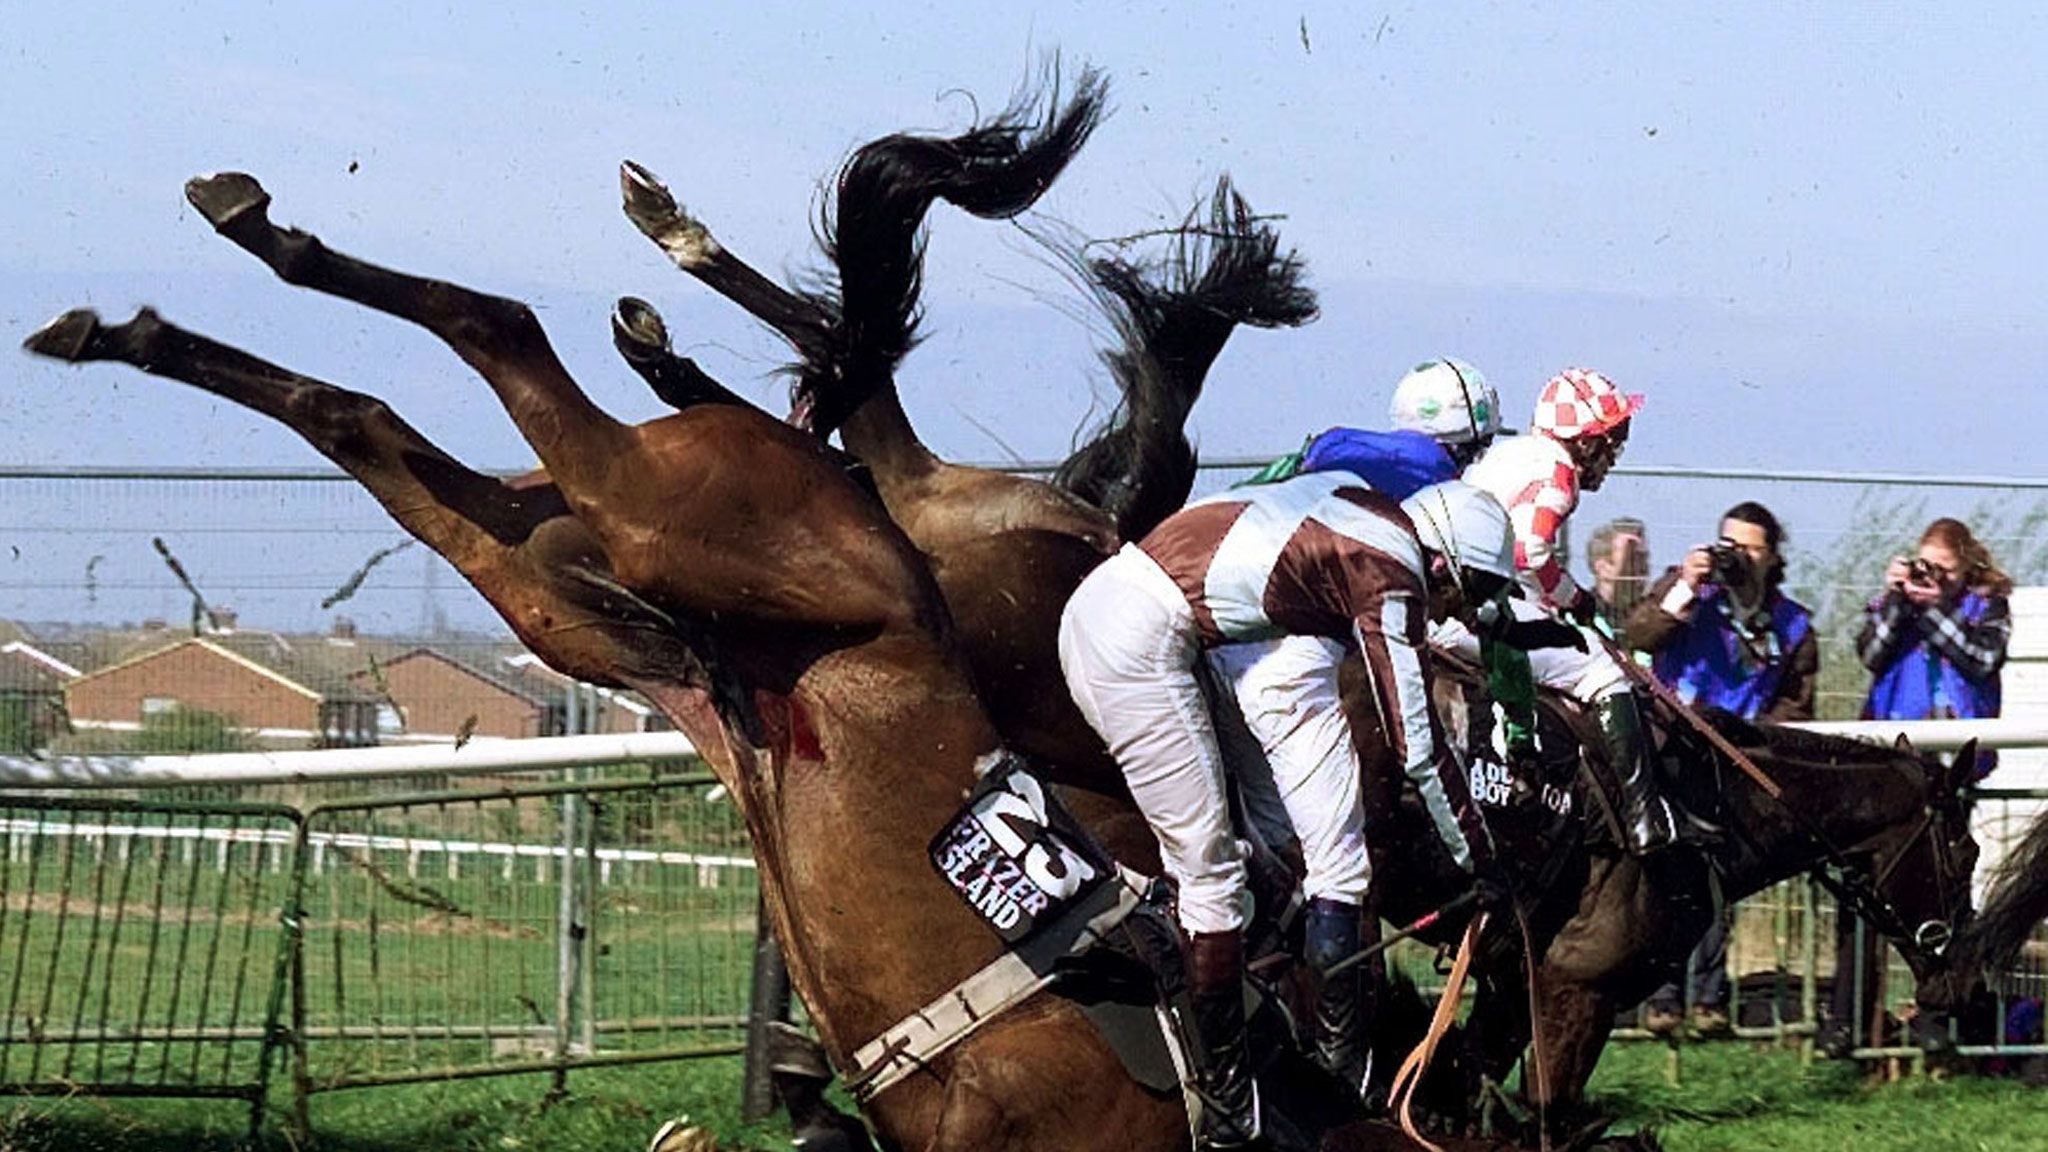 Grand National 'The day I realised everything about horse racing was